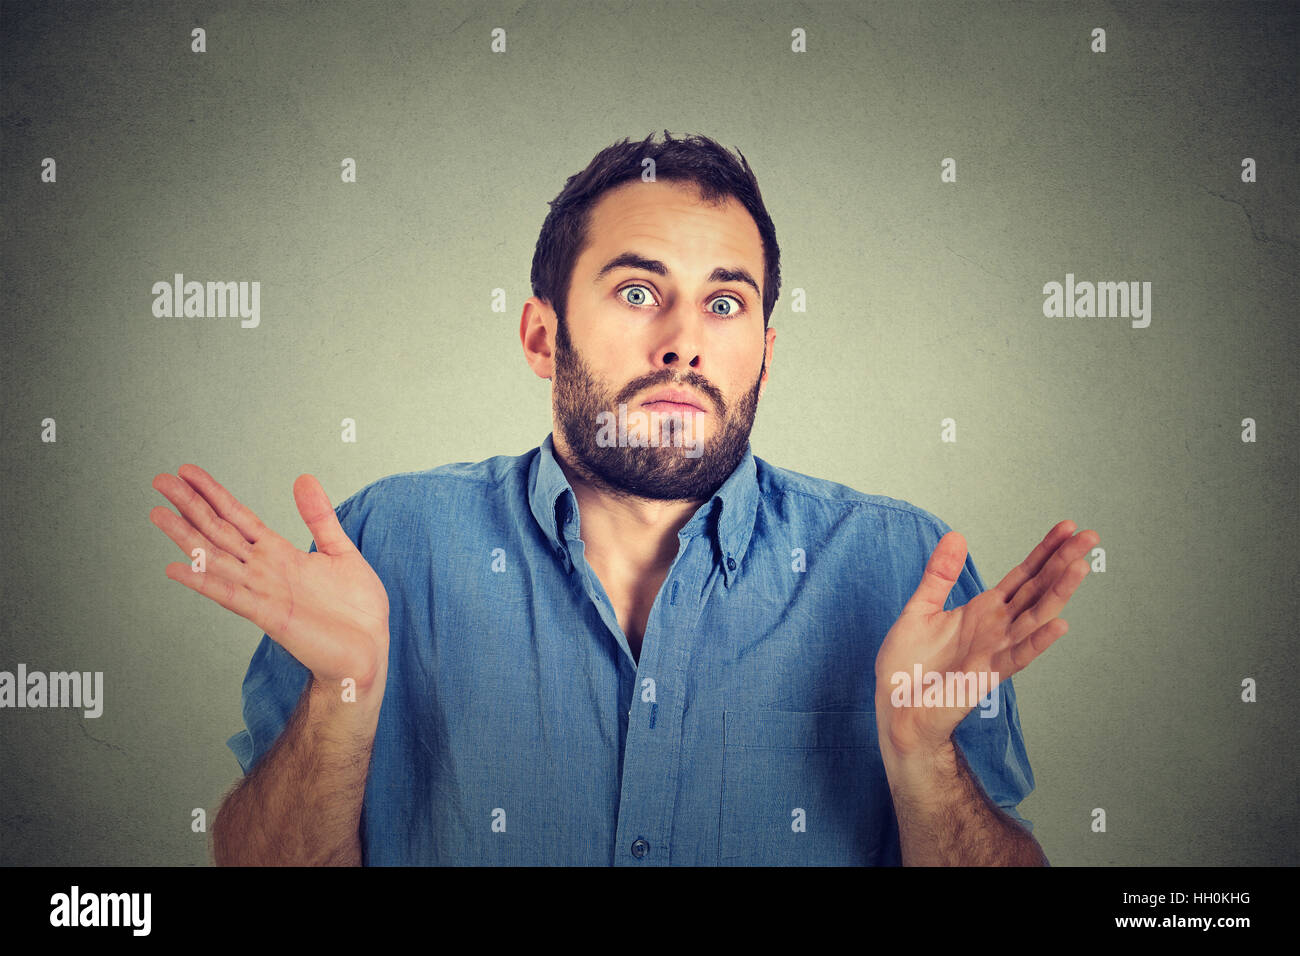 Closeup portrait young man shrugging shoulders who cares so what I don't know gesture isolated on gray background. Body language Stock Photo